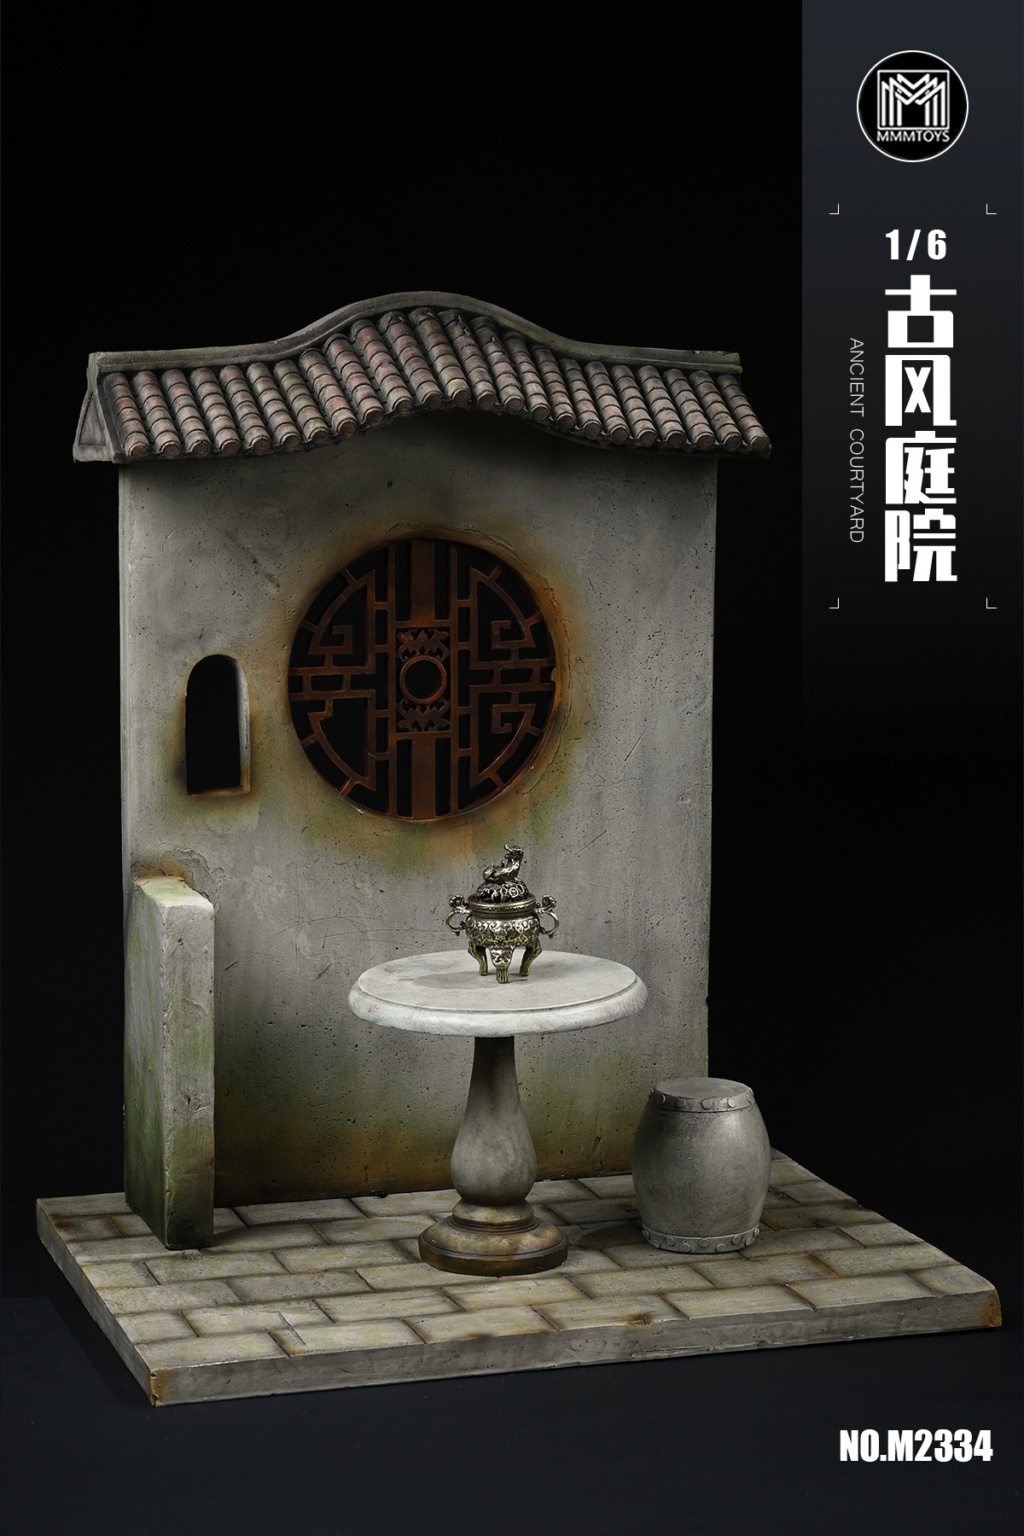 Accessory - NEW PRODUCT: MMMTOYS: 1/6 Ancient courtyard M2334 14152016